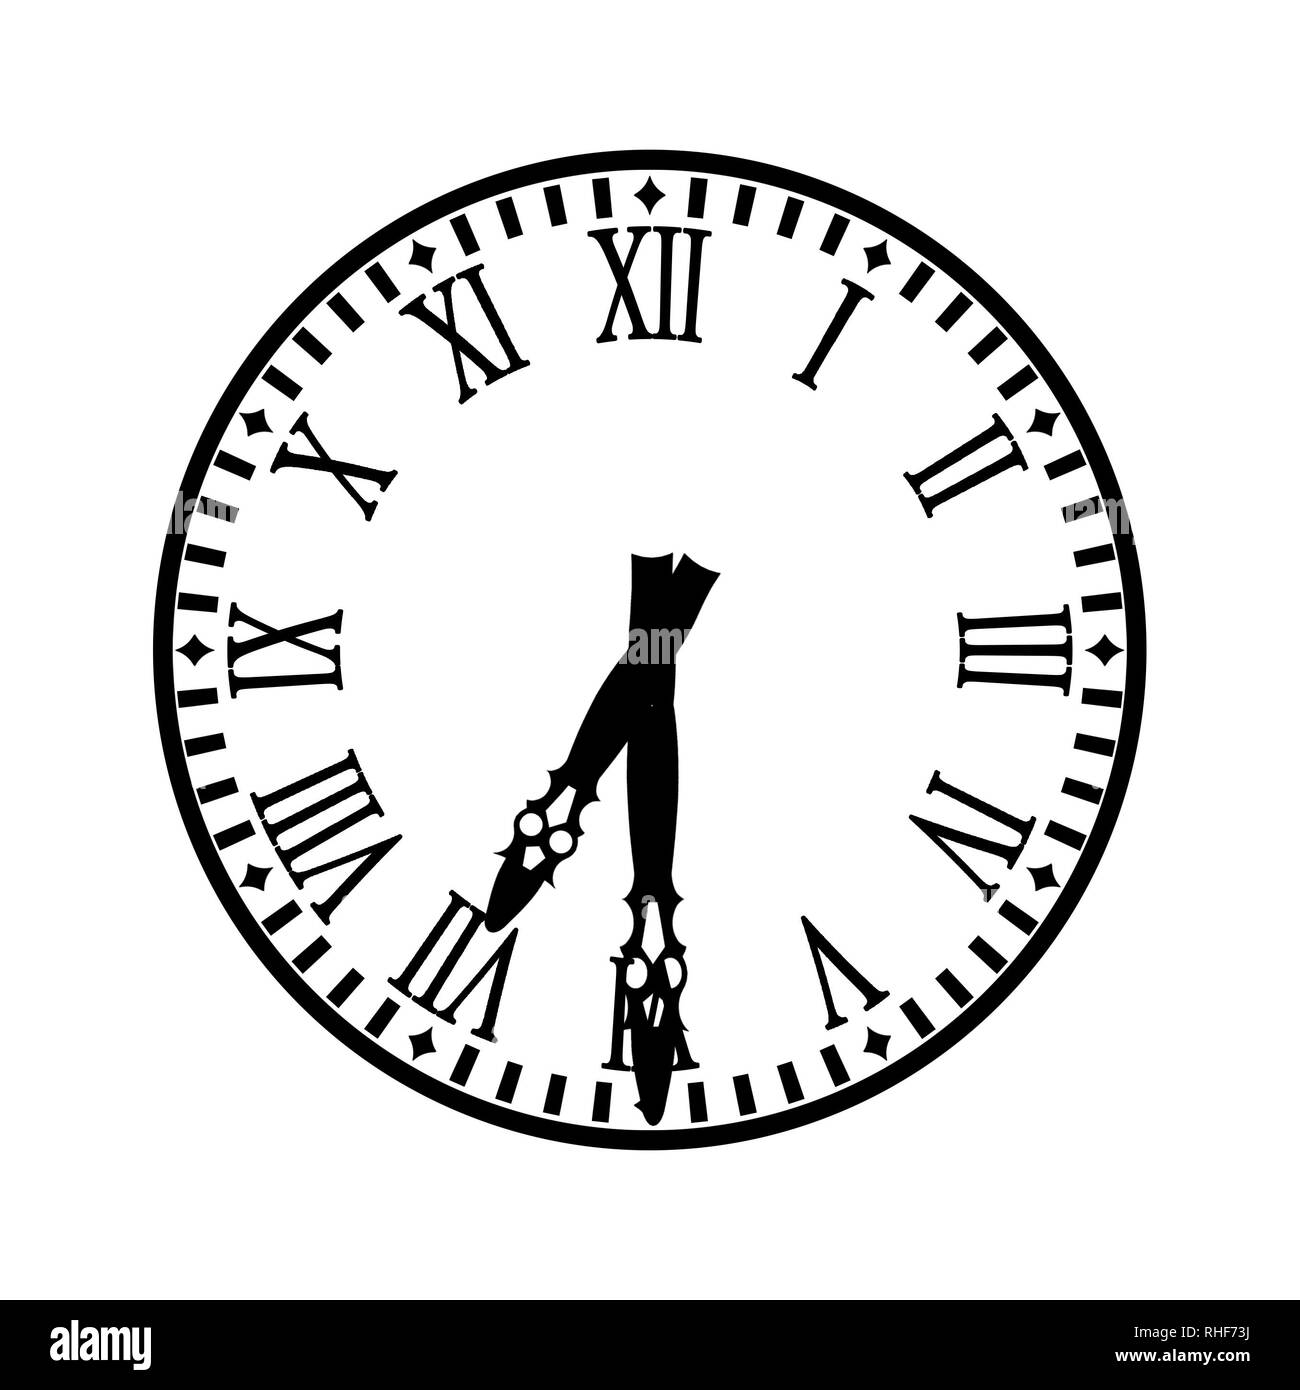 Clock with hour indicator and minute indicator Stock Photo